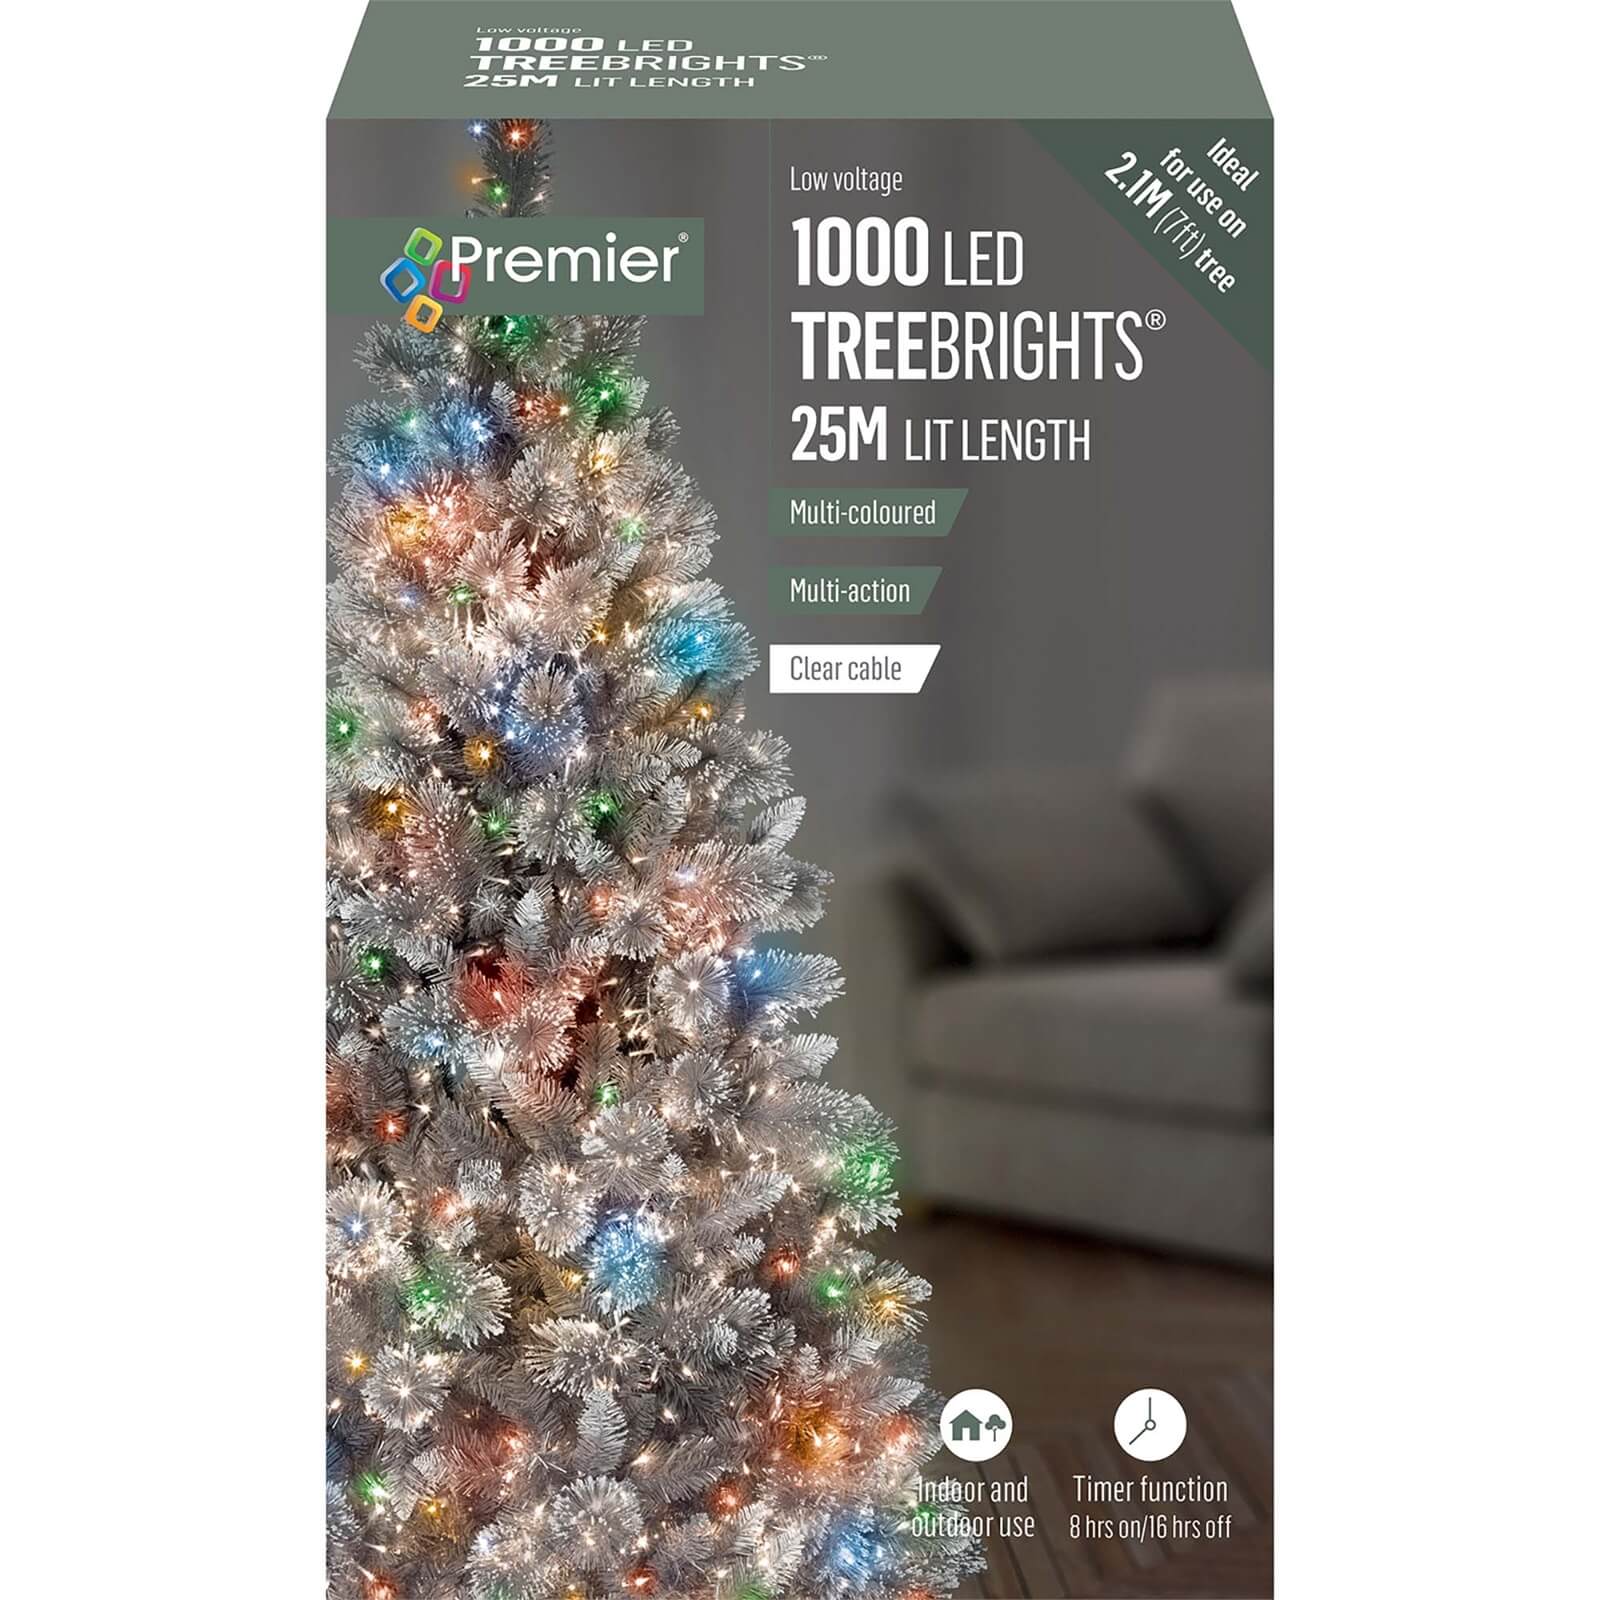 1000 Multi-coloured Multiaction LED Treebrights (with Timer)